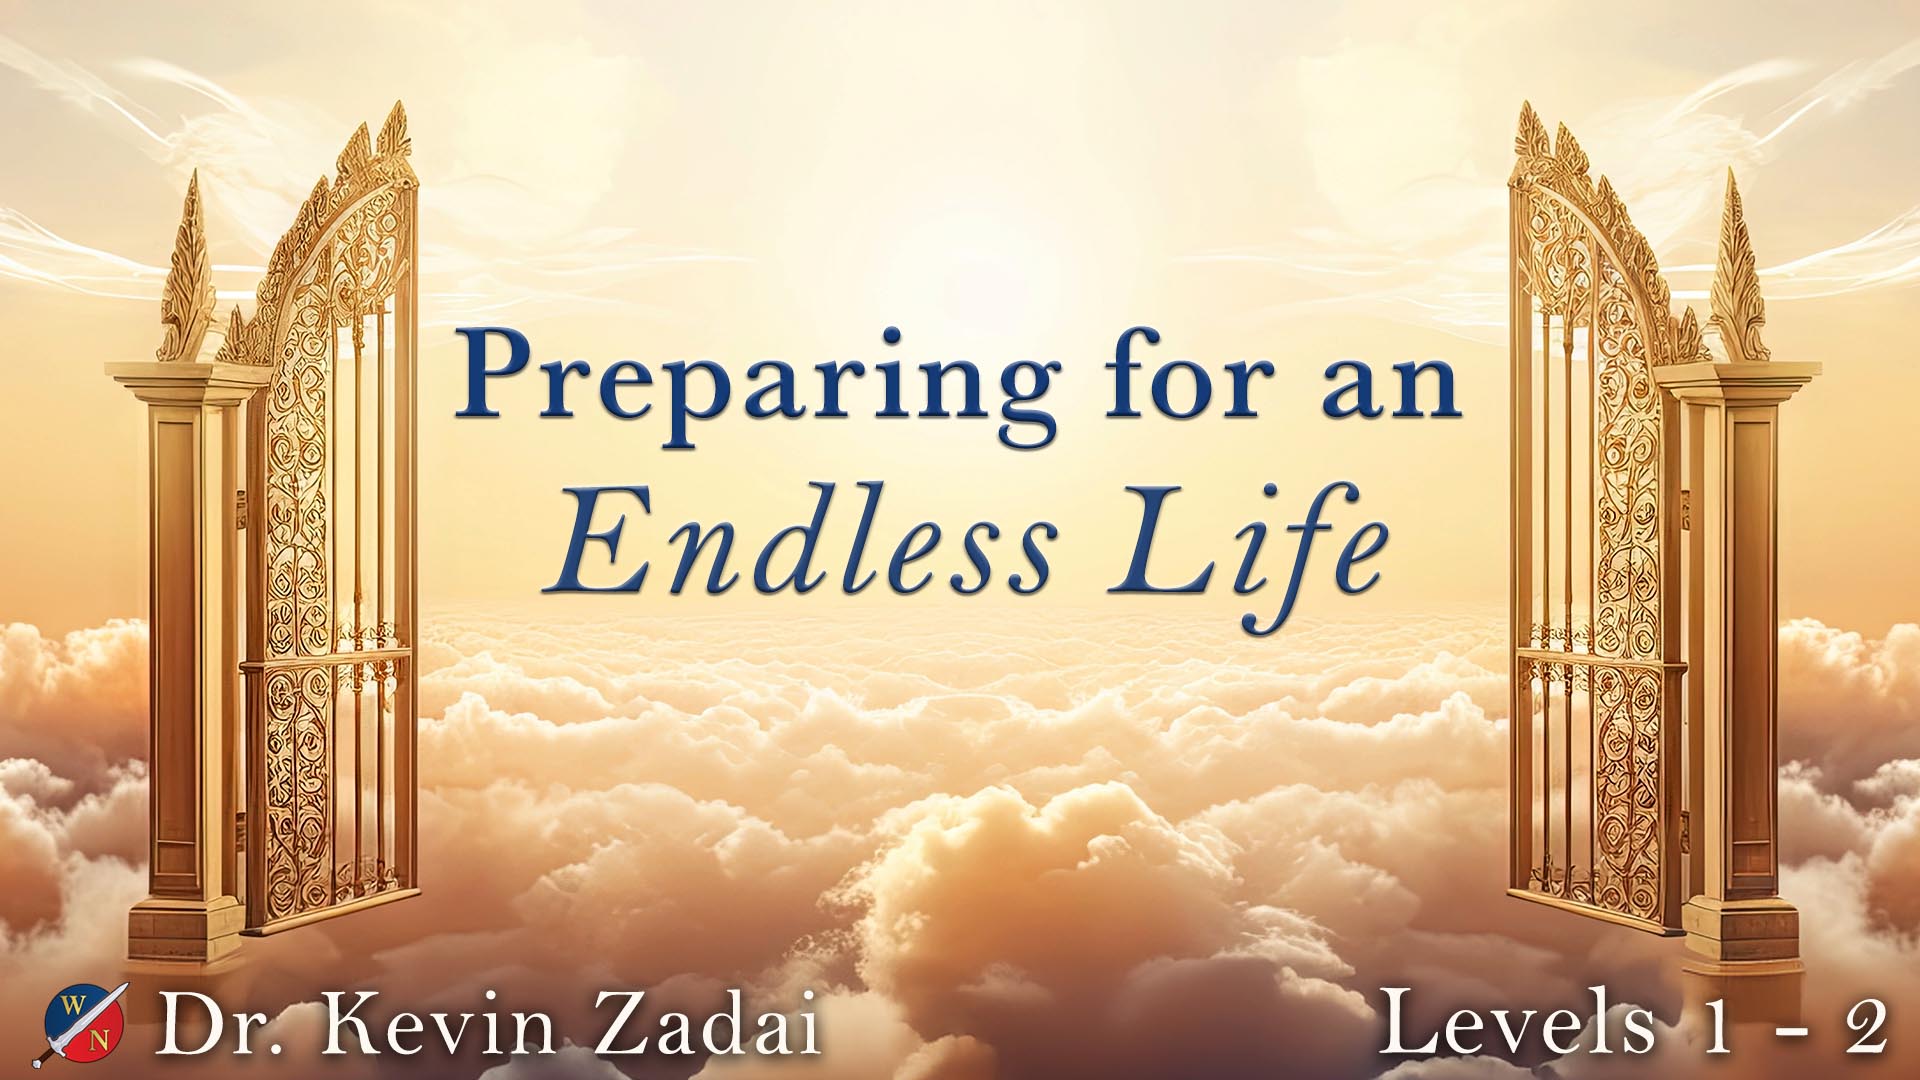 Preparing for an Endless Life bundle with Dr. Kevin Zadai